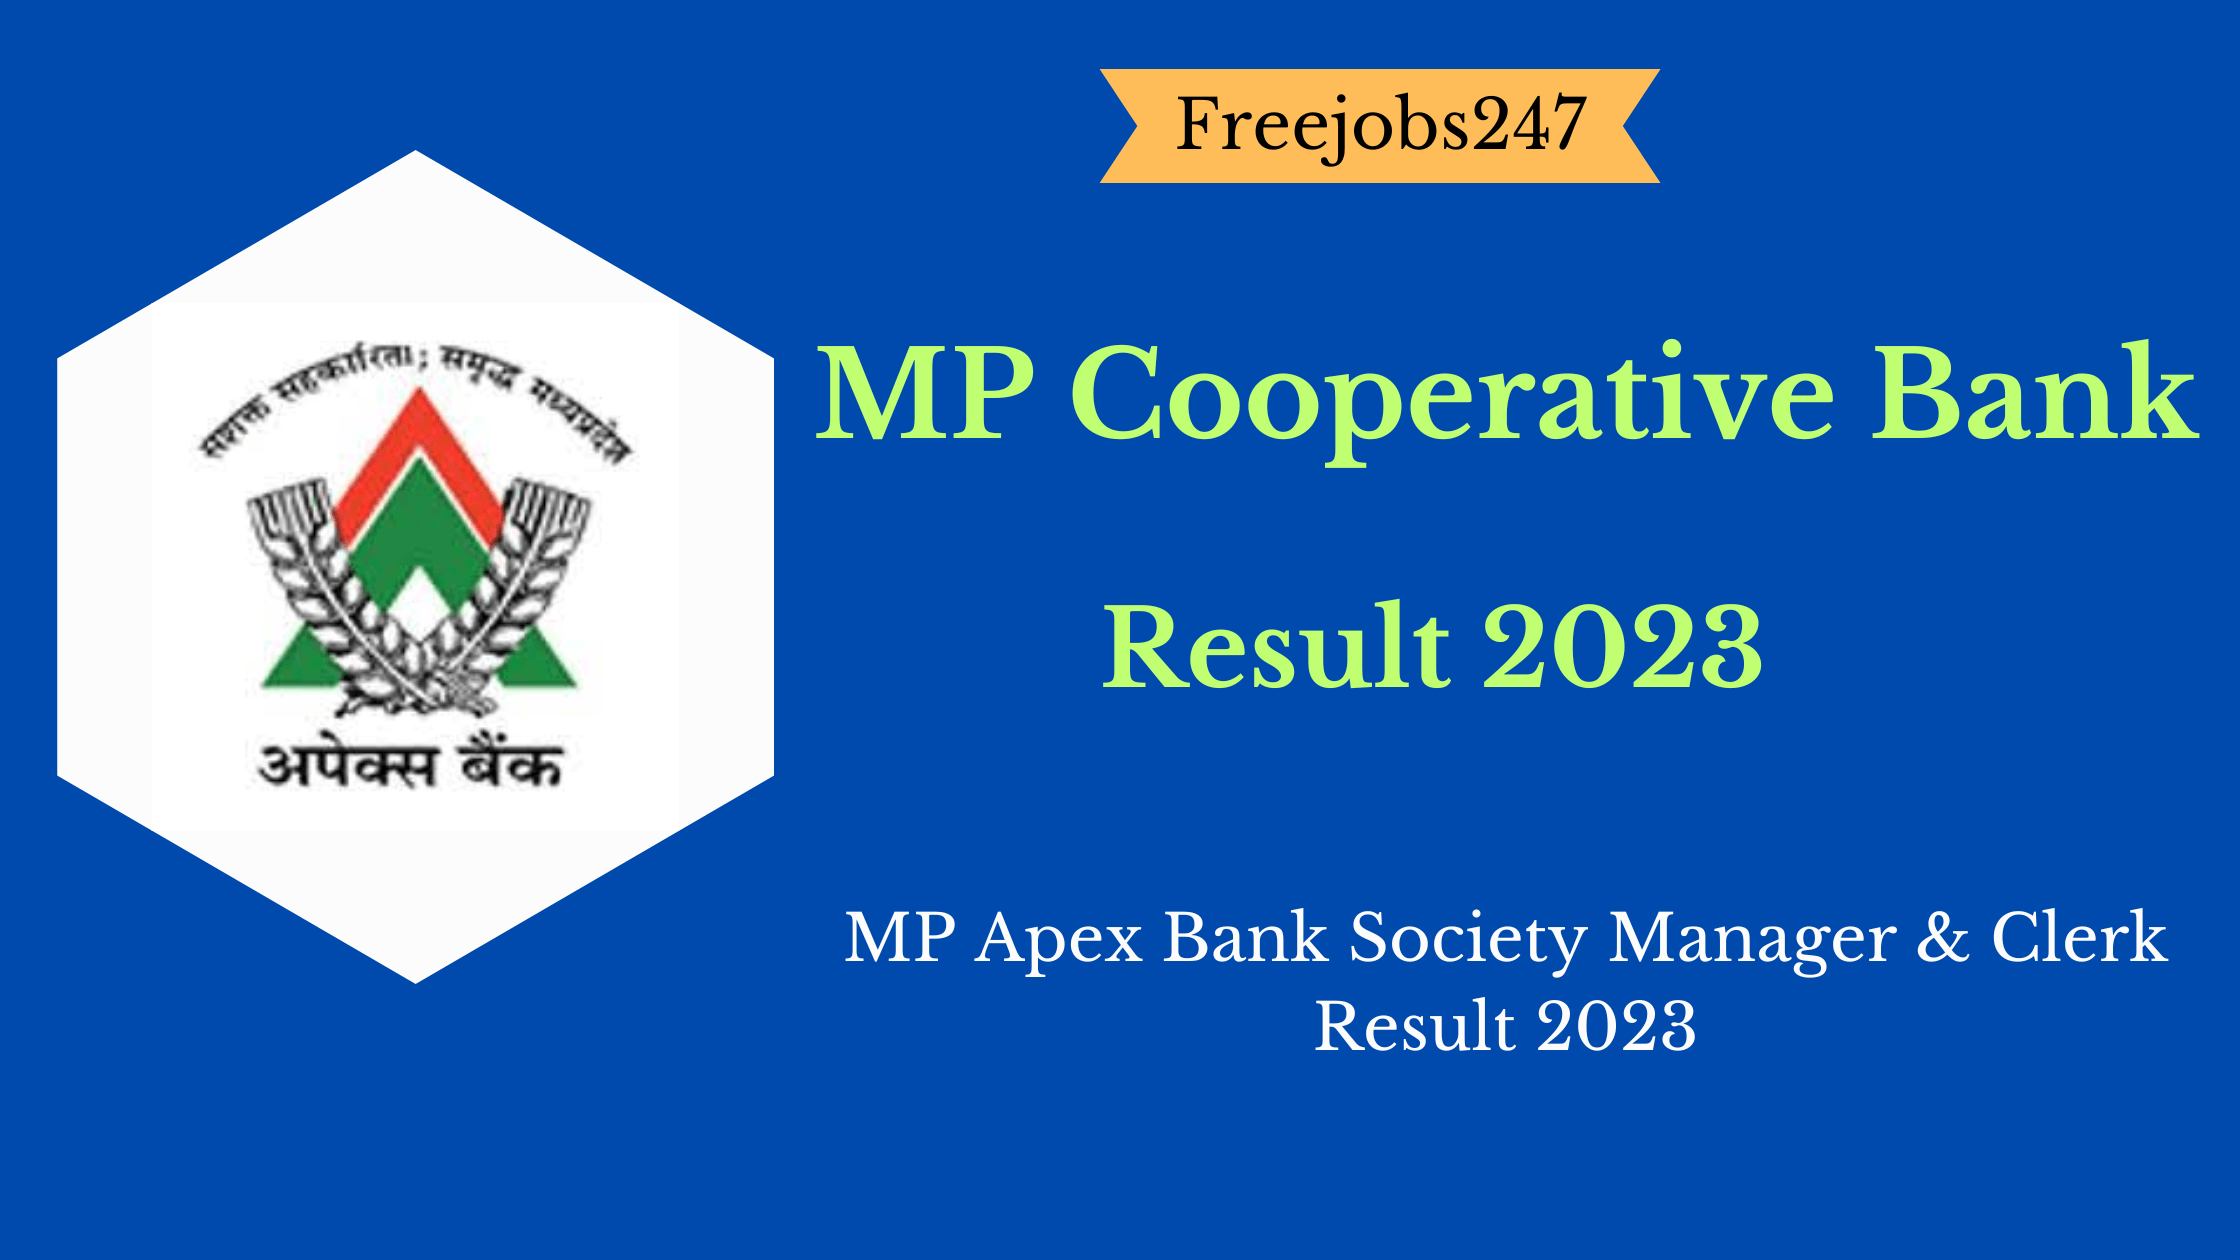 MP Cooperative Bank Result 2023